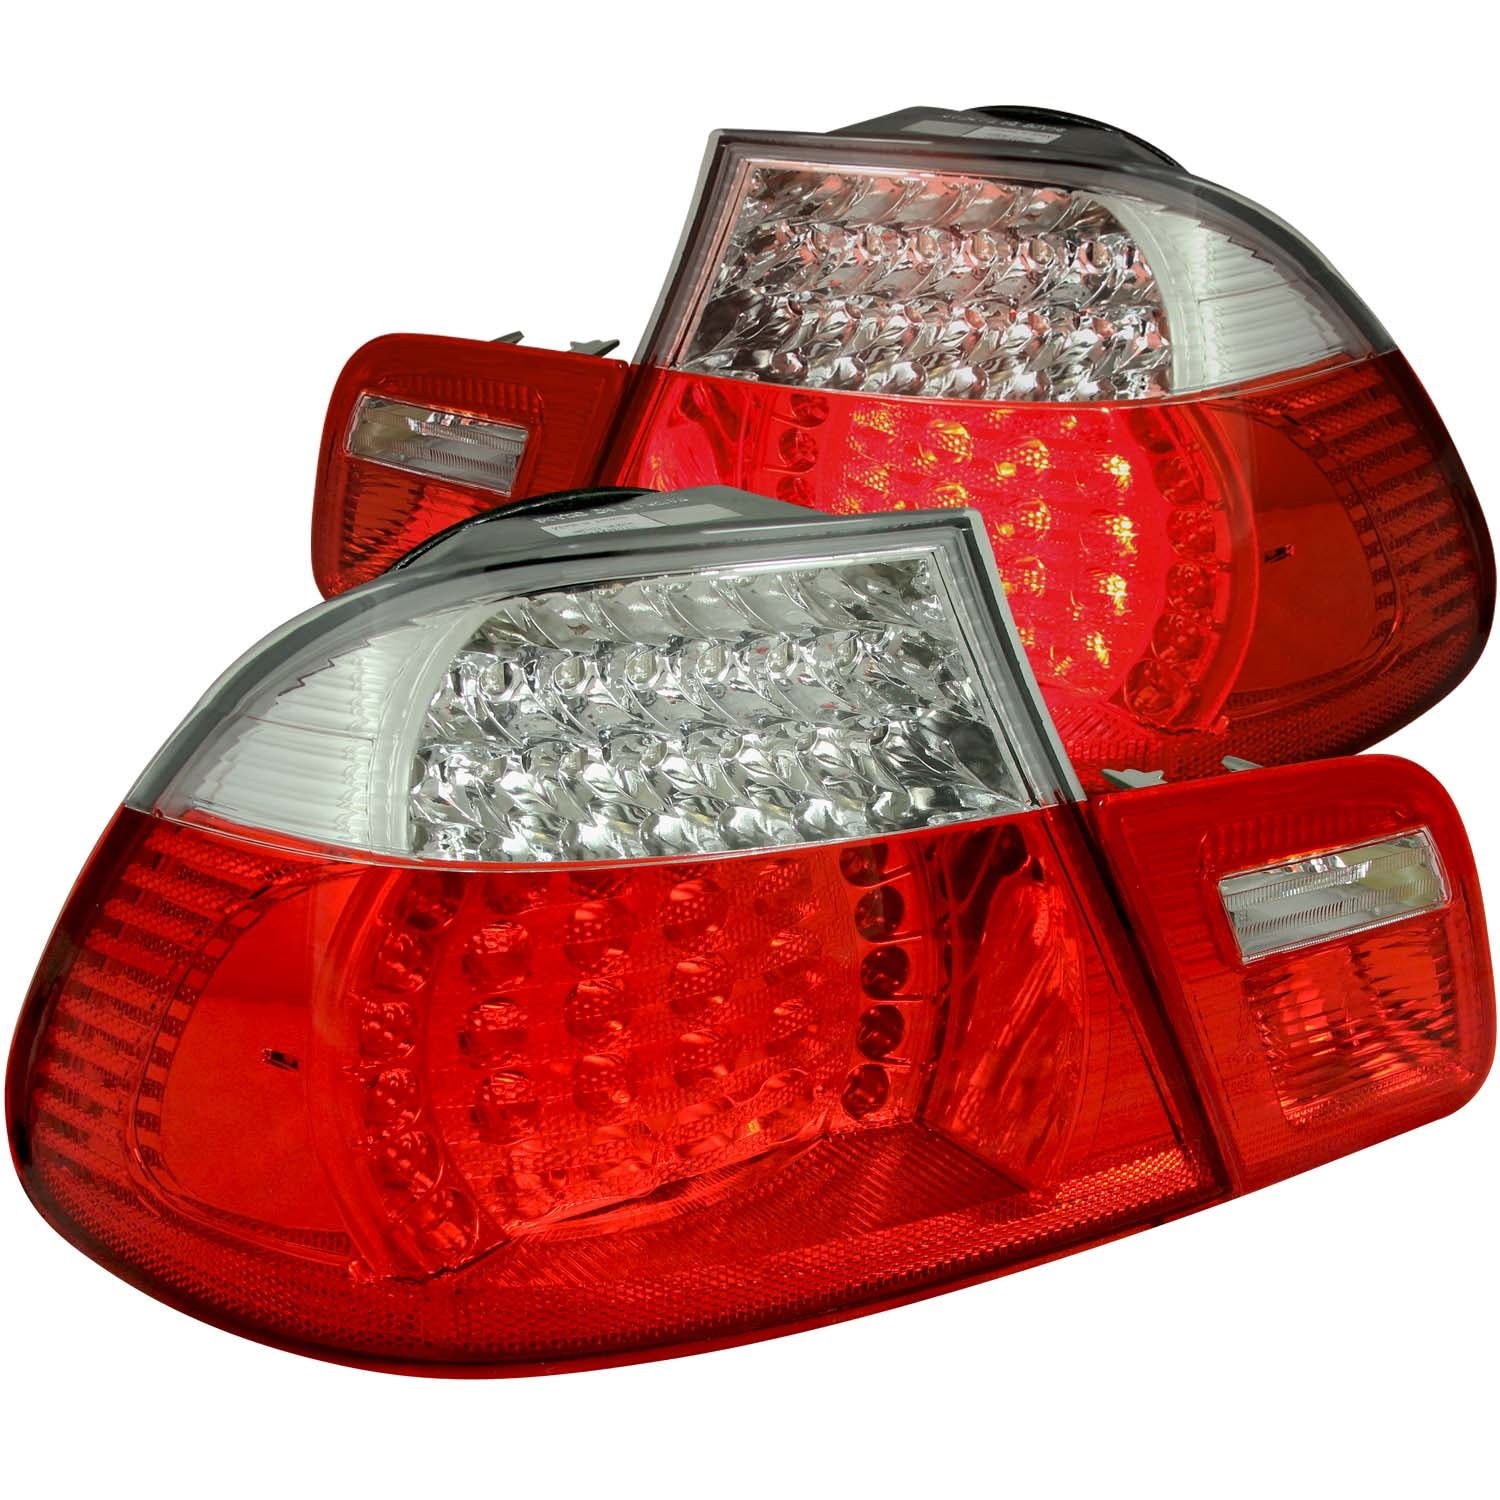 AnzoUSA 321105 LED Taillights Red/Clear